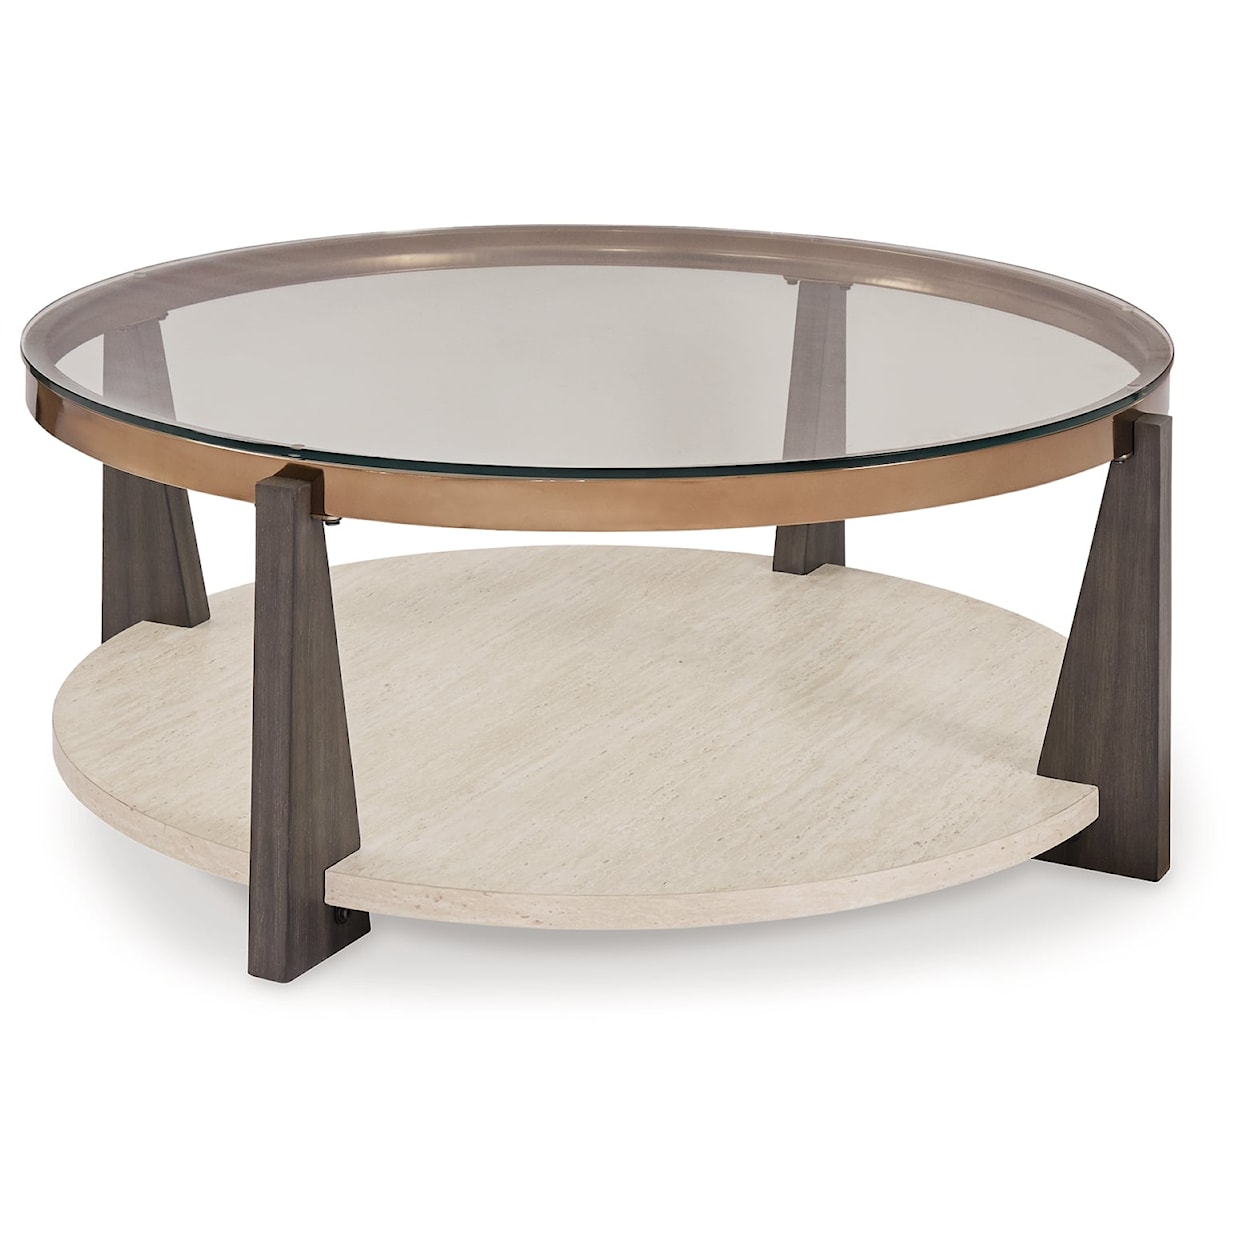 Signature Design by Ashley Frazwa Round Coffee Table